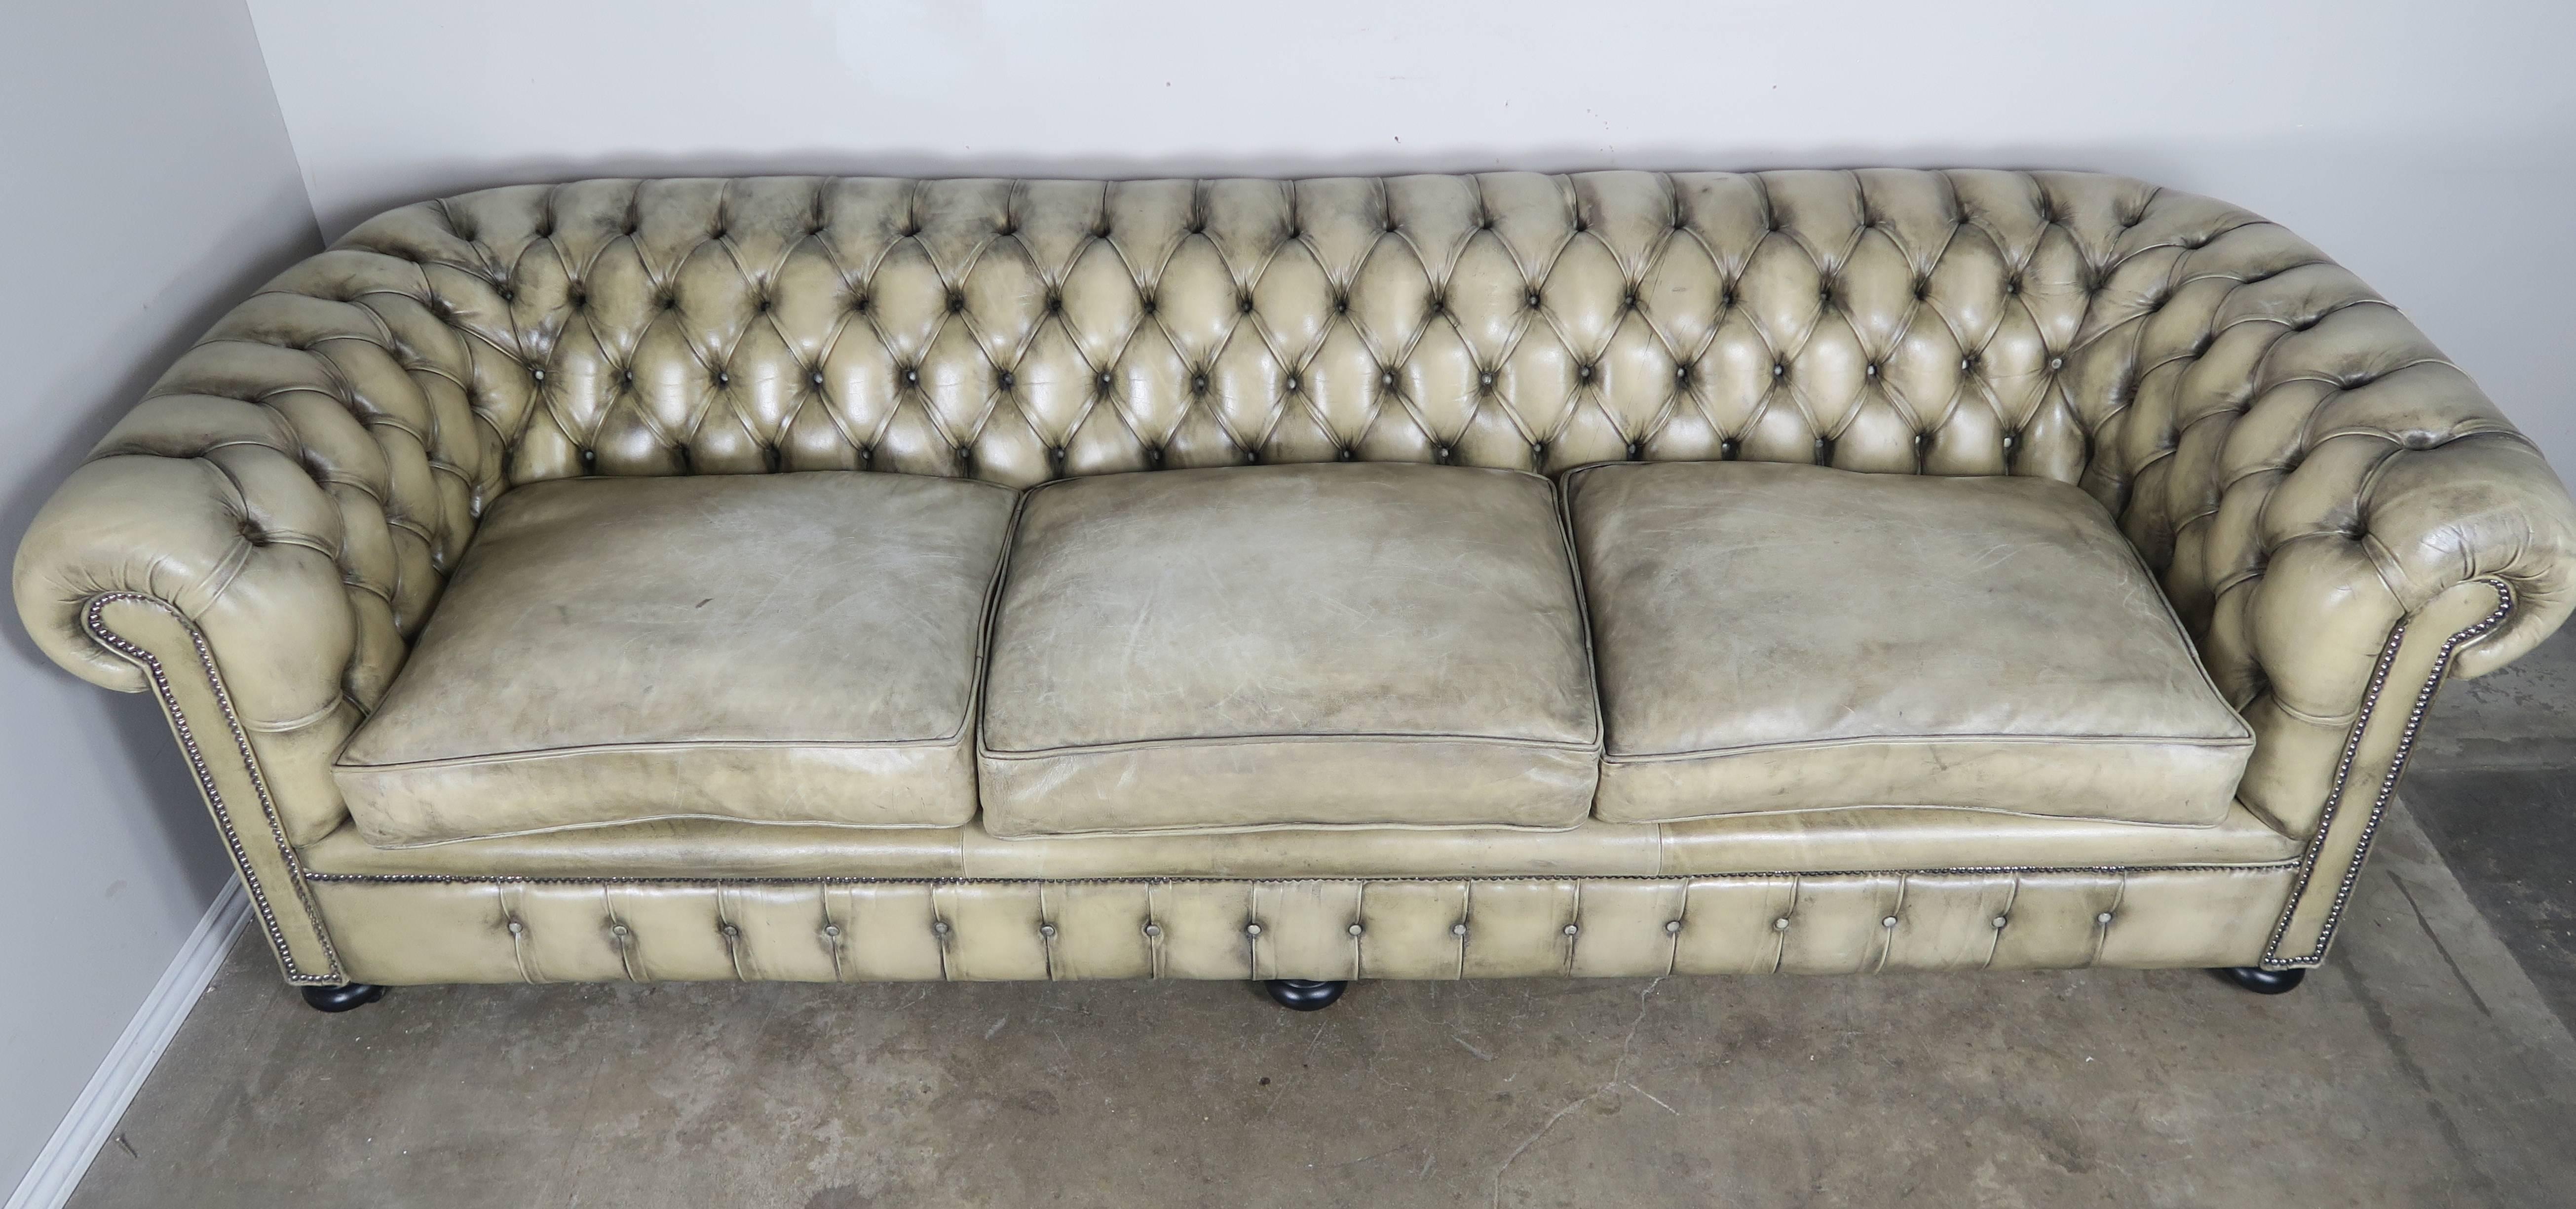 Tufted English Leather Chesterfield Sofa in perfectly worn leather, measure: 9' long. The leather has faded into a beautiful color and is in pristine condition. Tight back with three loose seat cushions. Nailhead trim detail throughout. The sofa